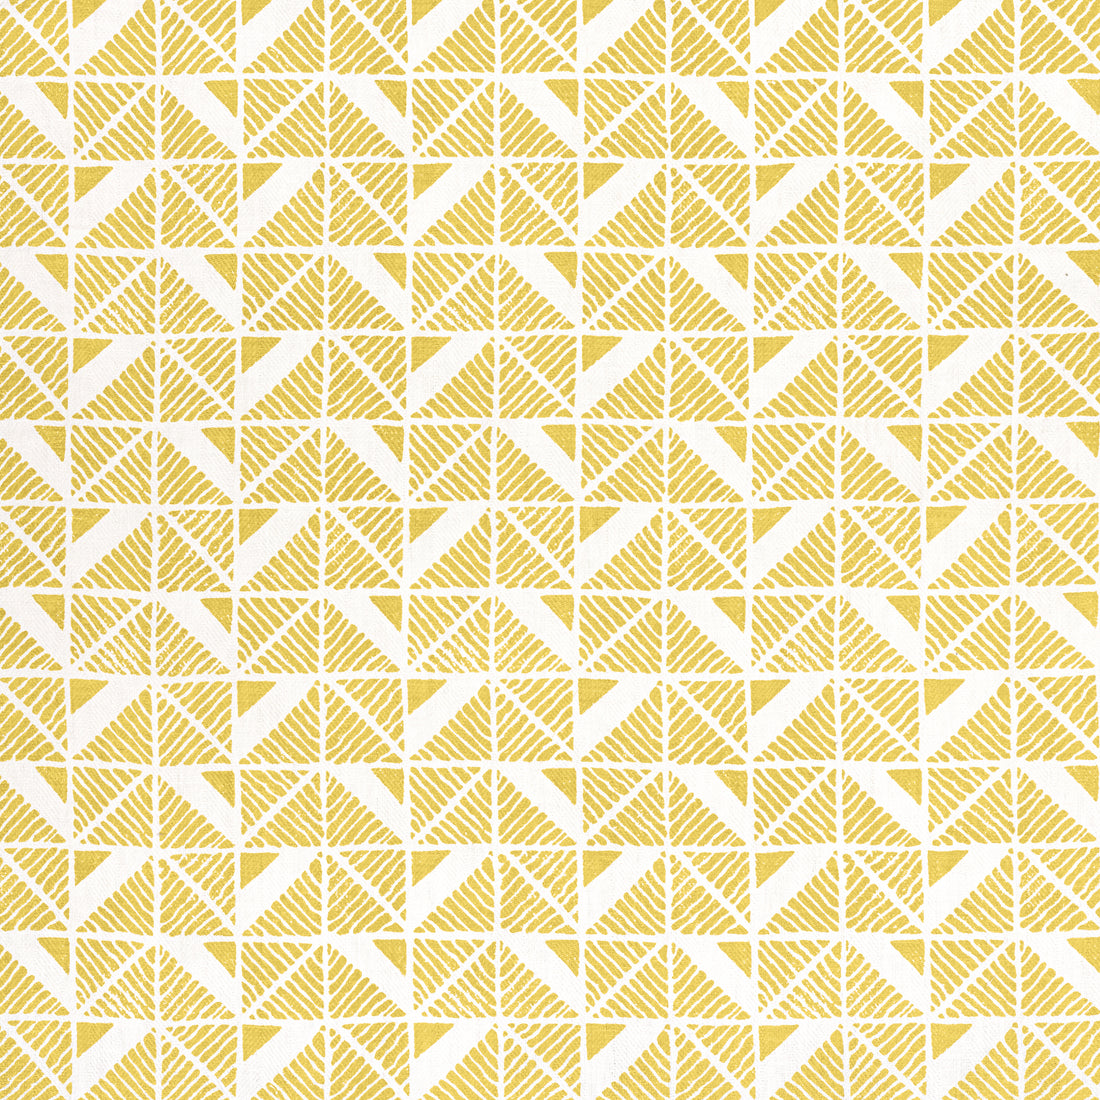 Bloomsbury Square fabric in gold color - pattern number AF23115 - by Anna French in the Willow Tree collection